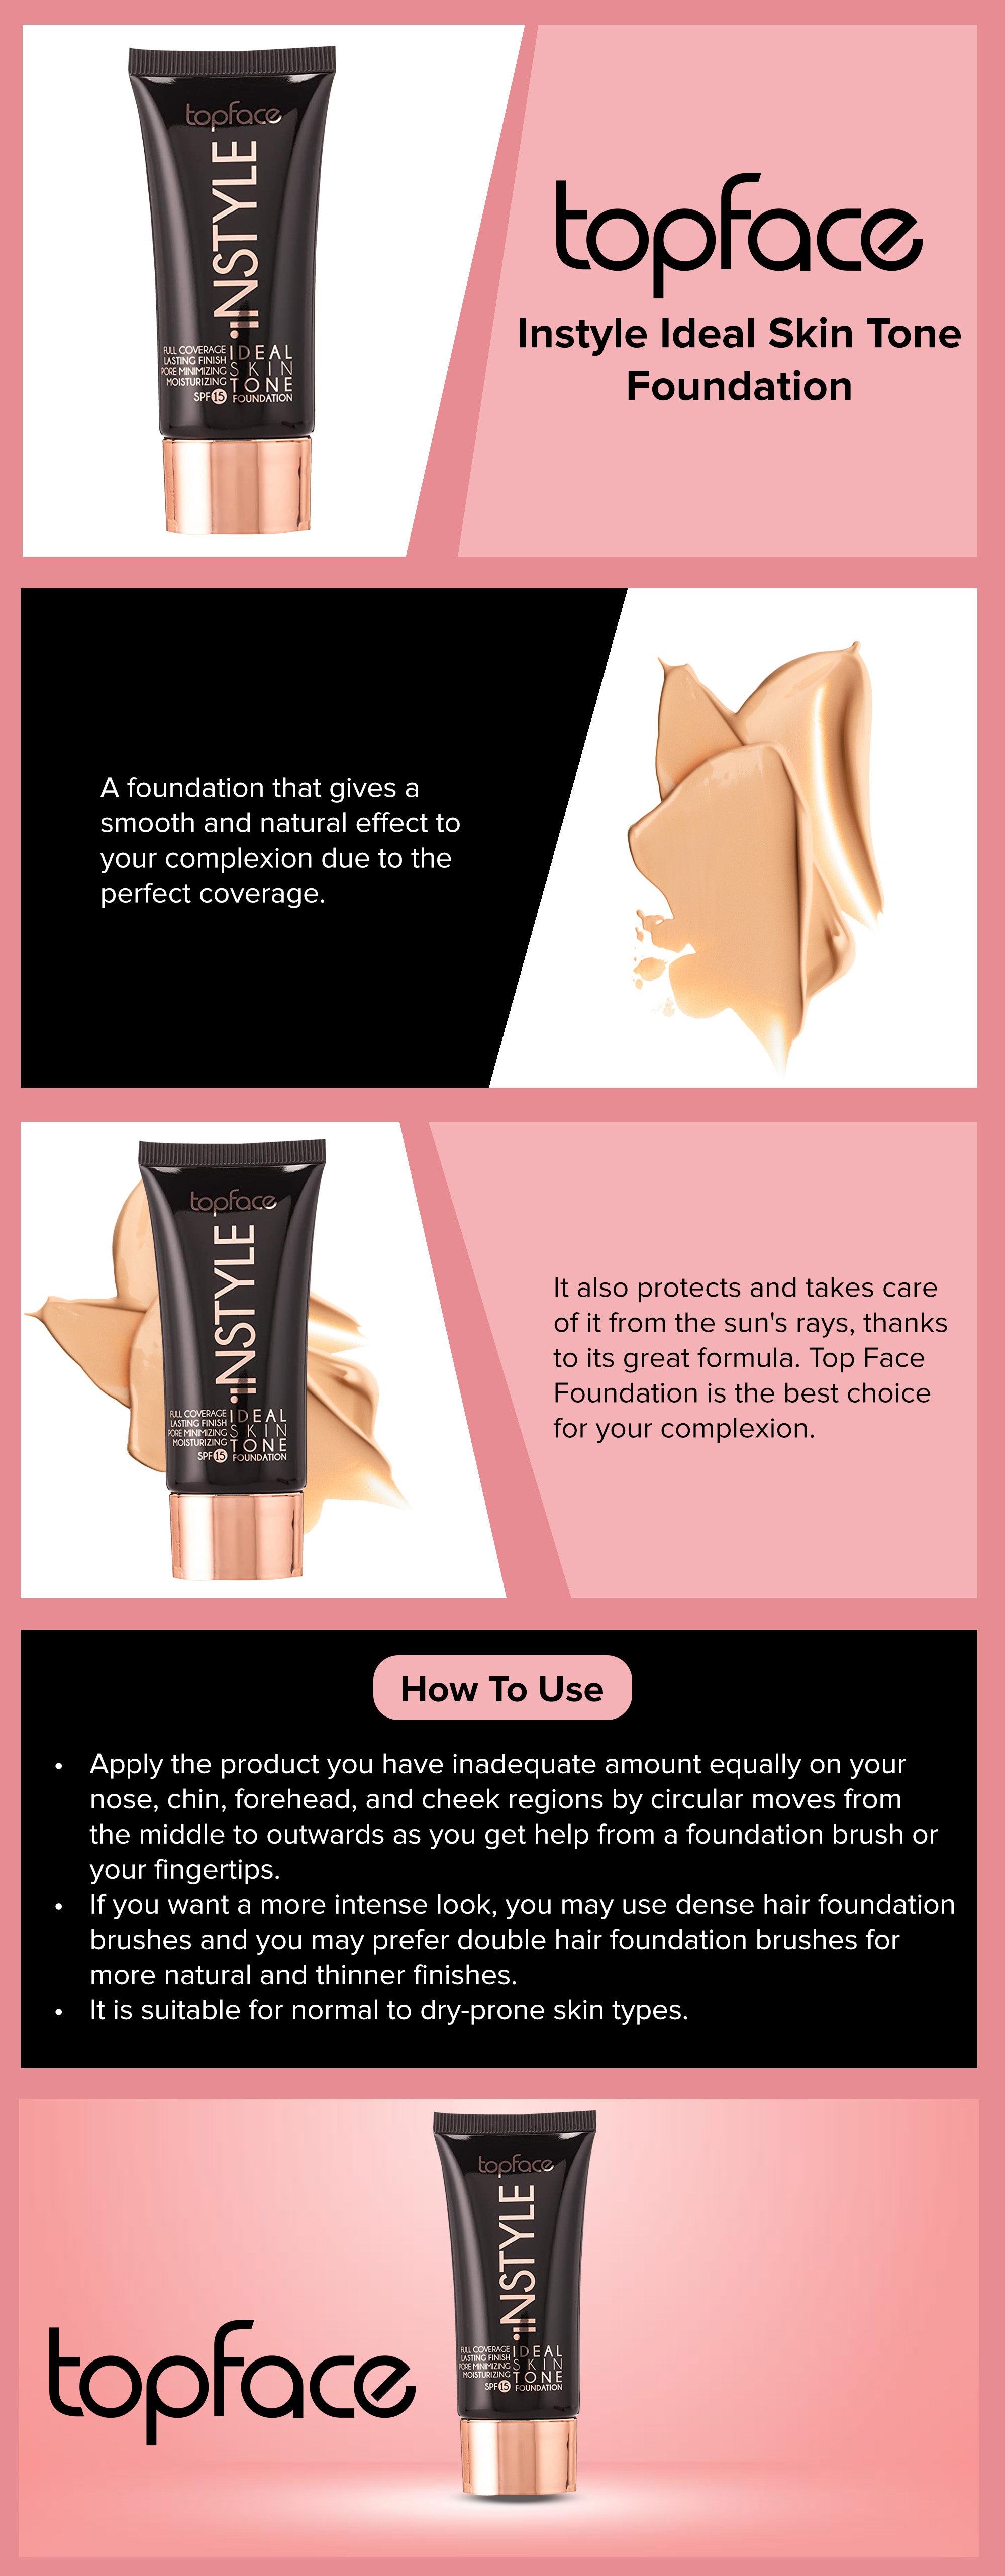 TOPFACE INSTYLE PERFECT COVERAGE FOUNDATION